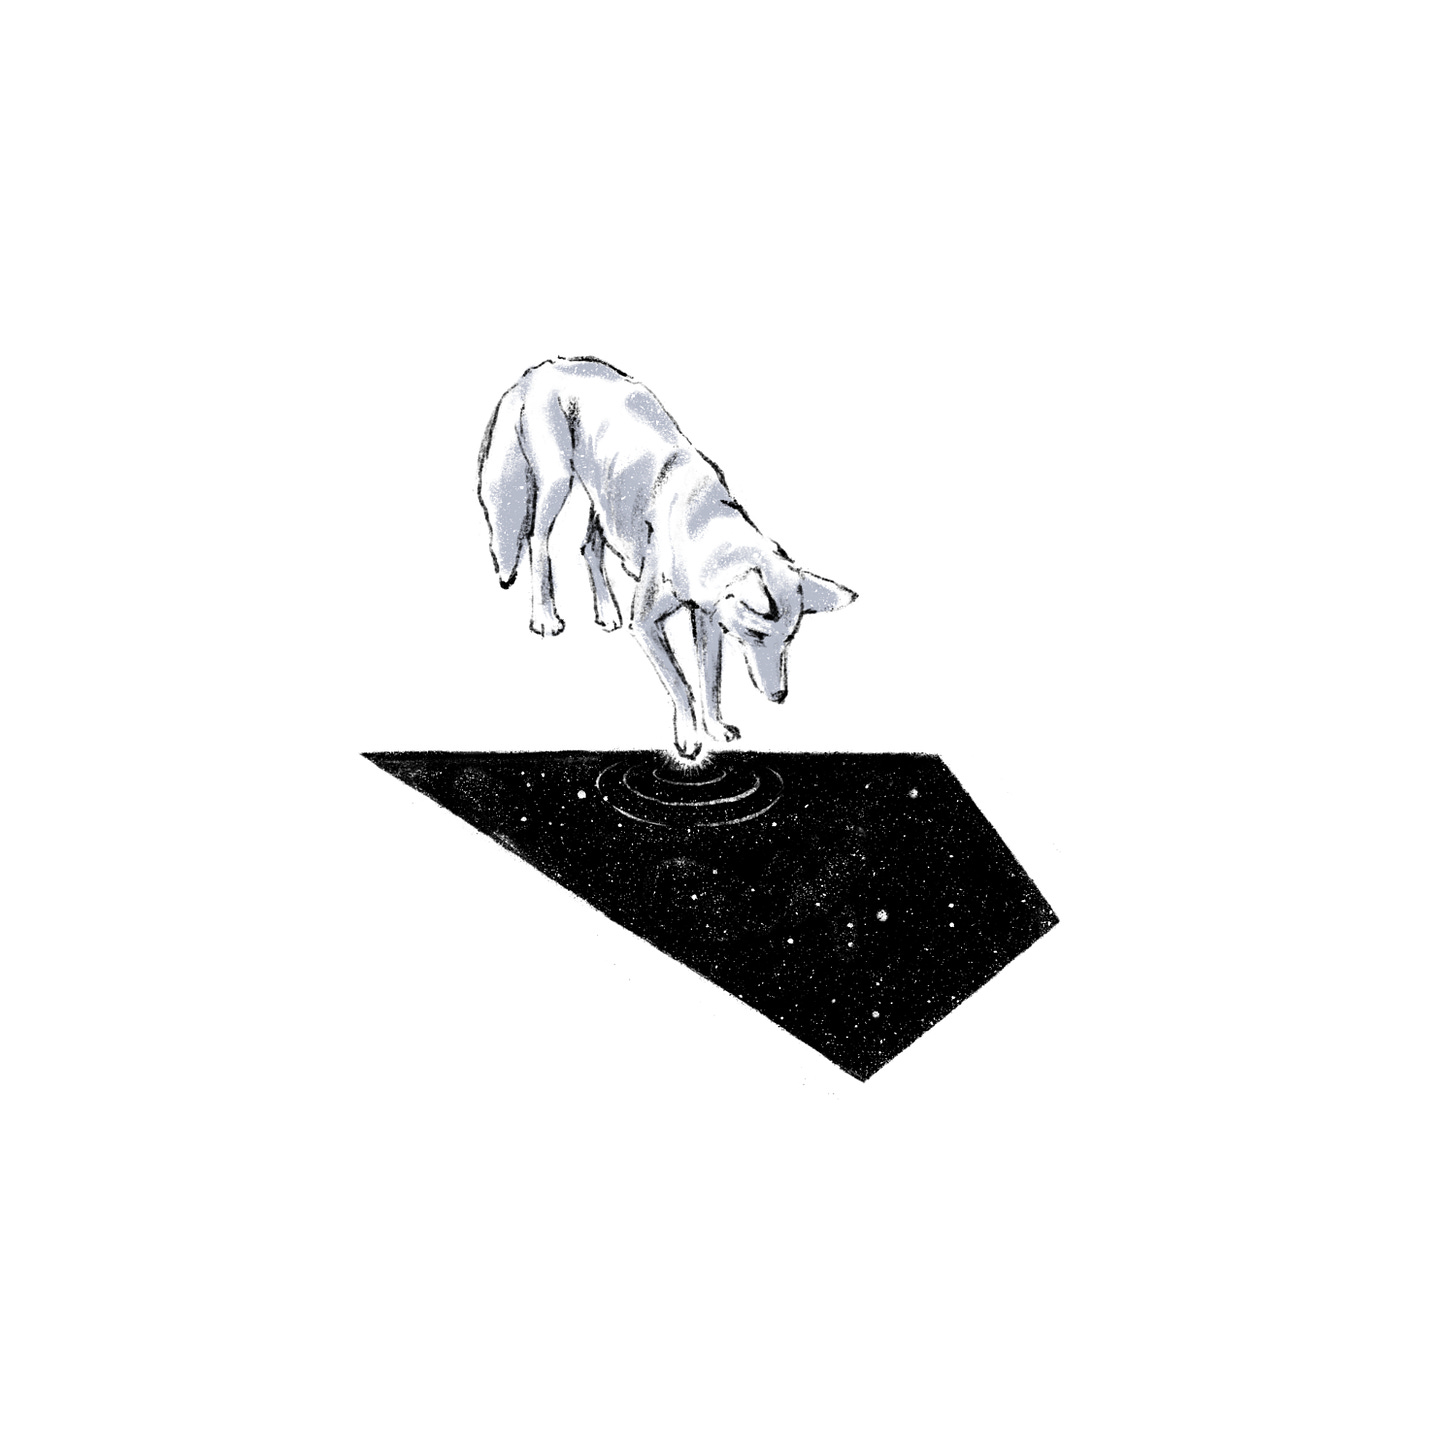 A drawing of a coyote with its paw on a black kite-shaped portal to outer space